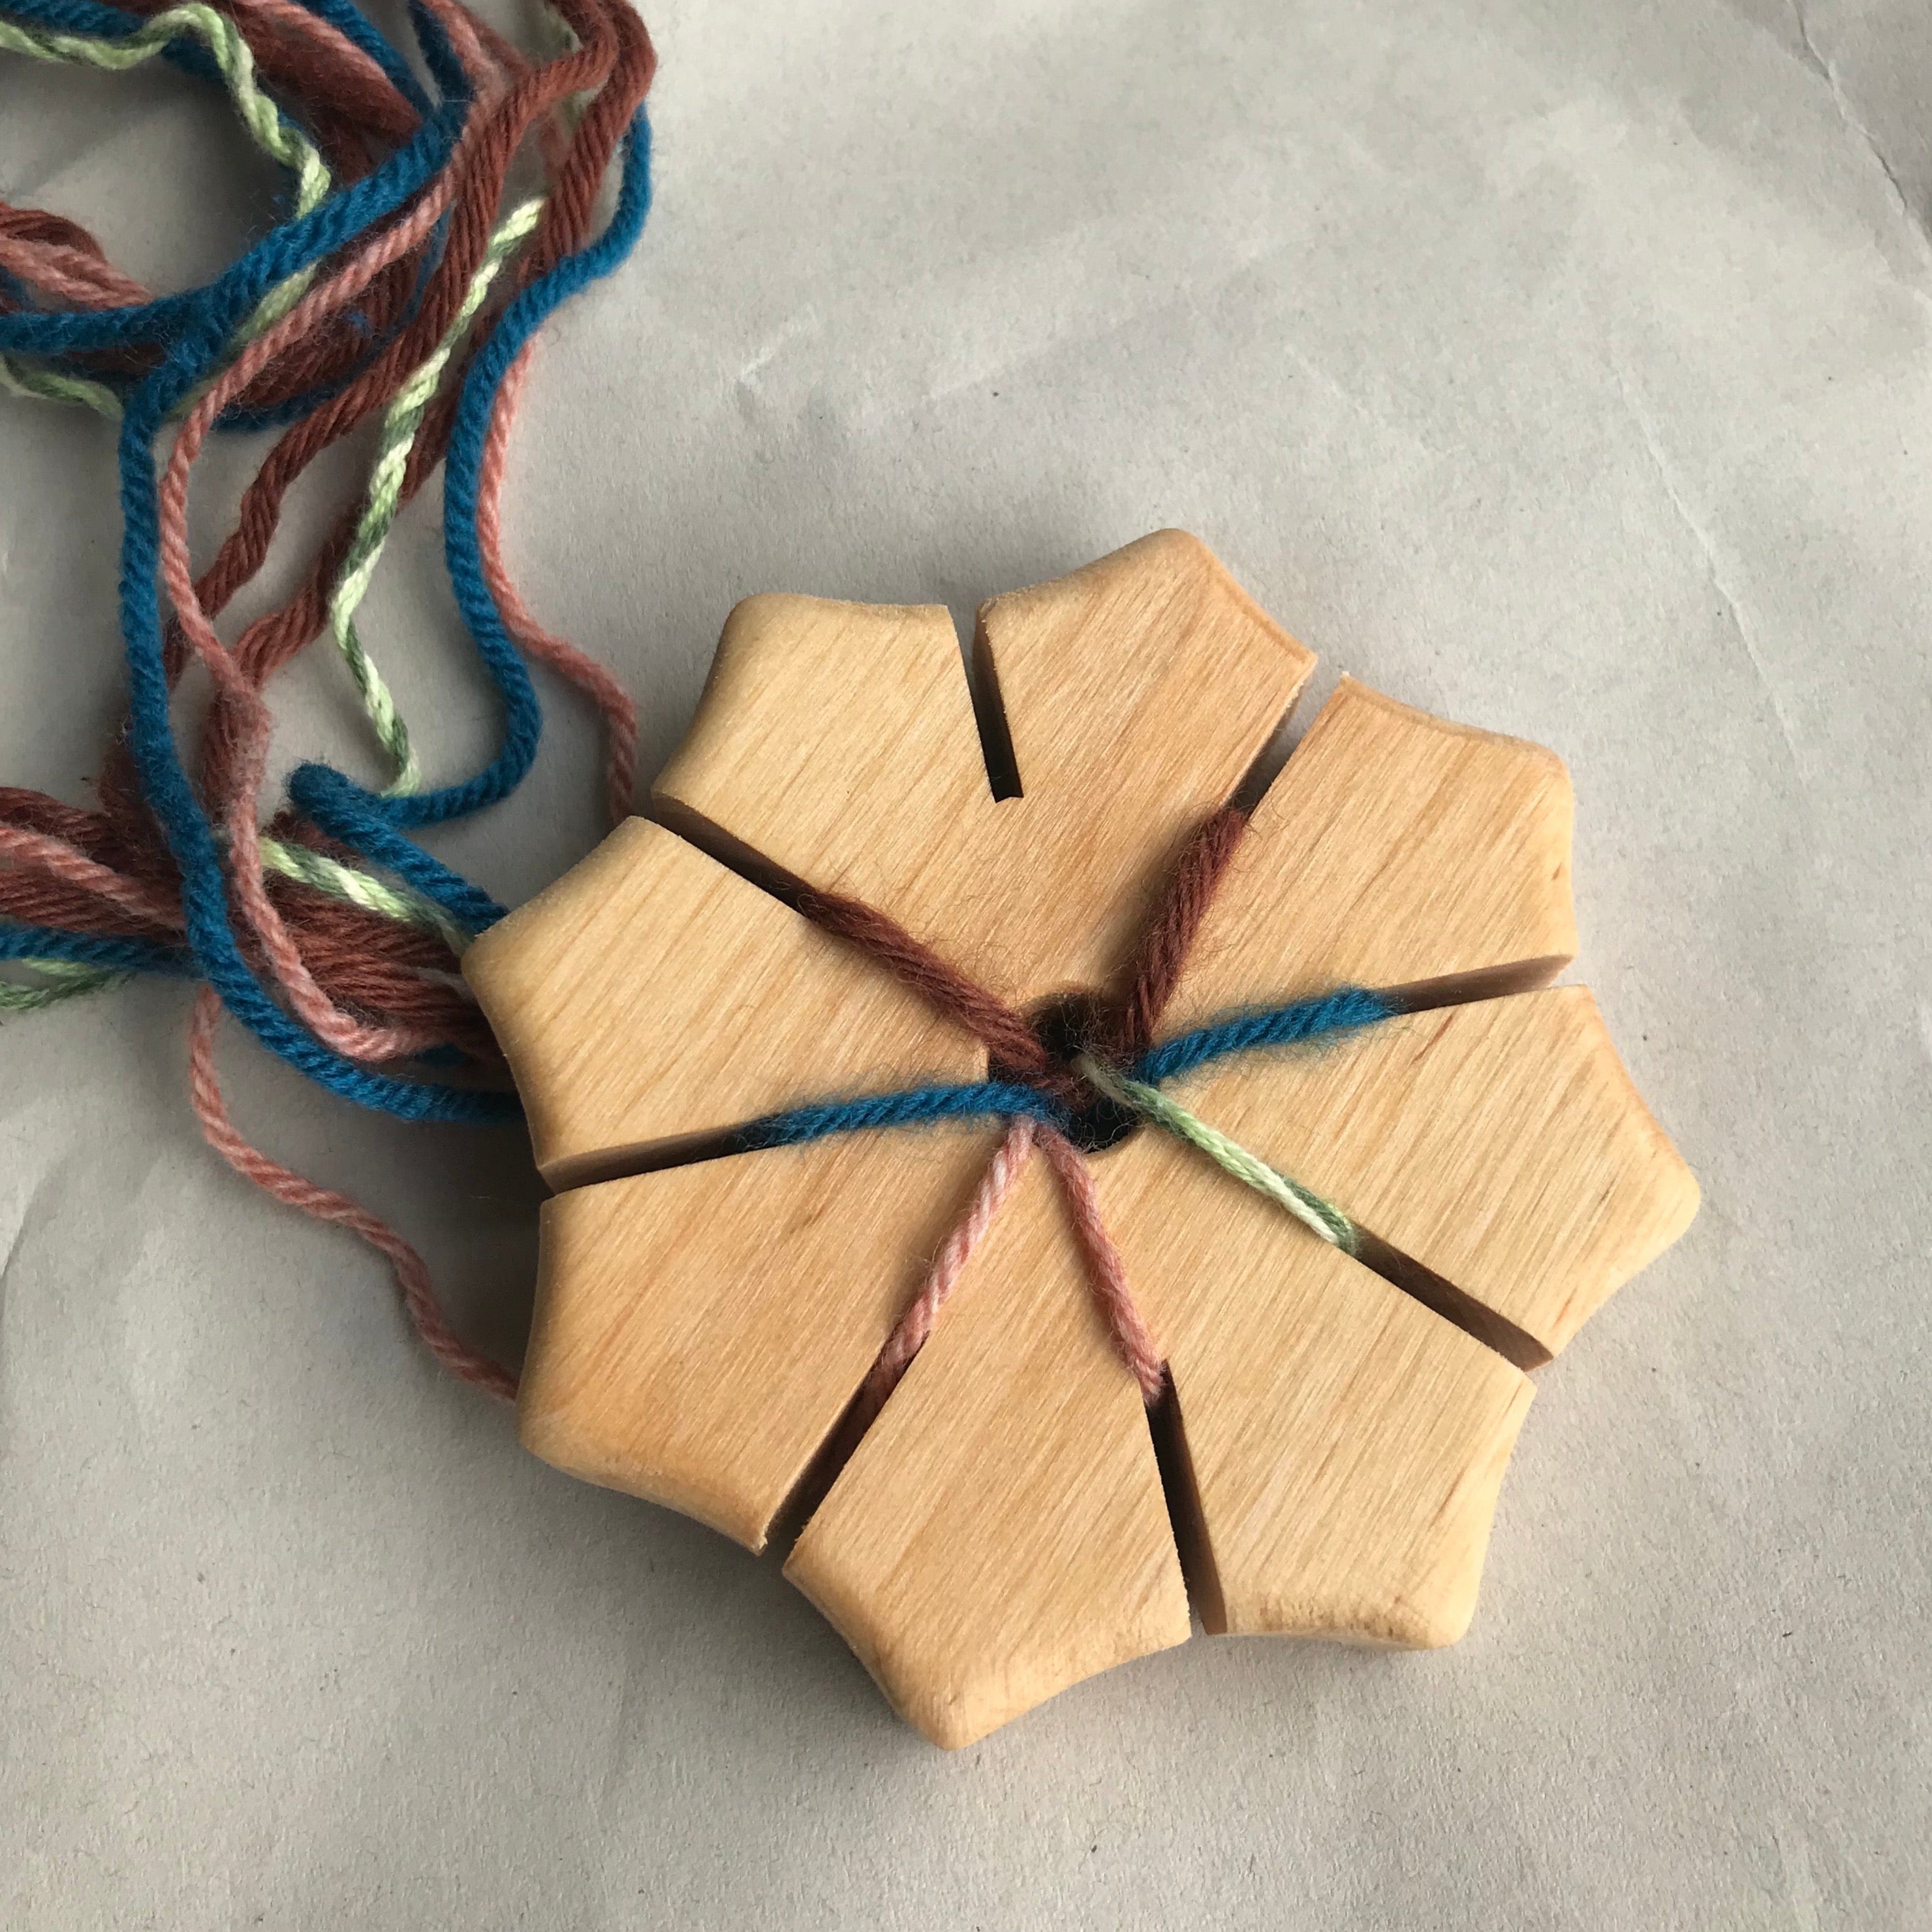 Wooden knotting disc